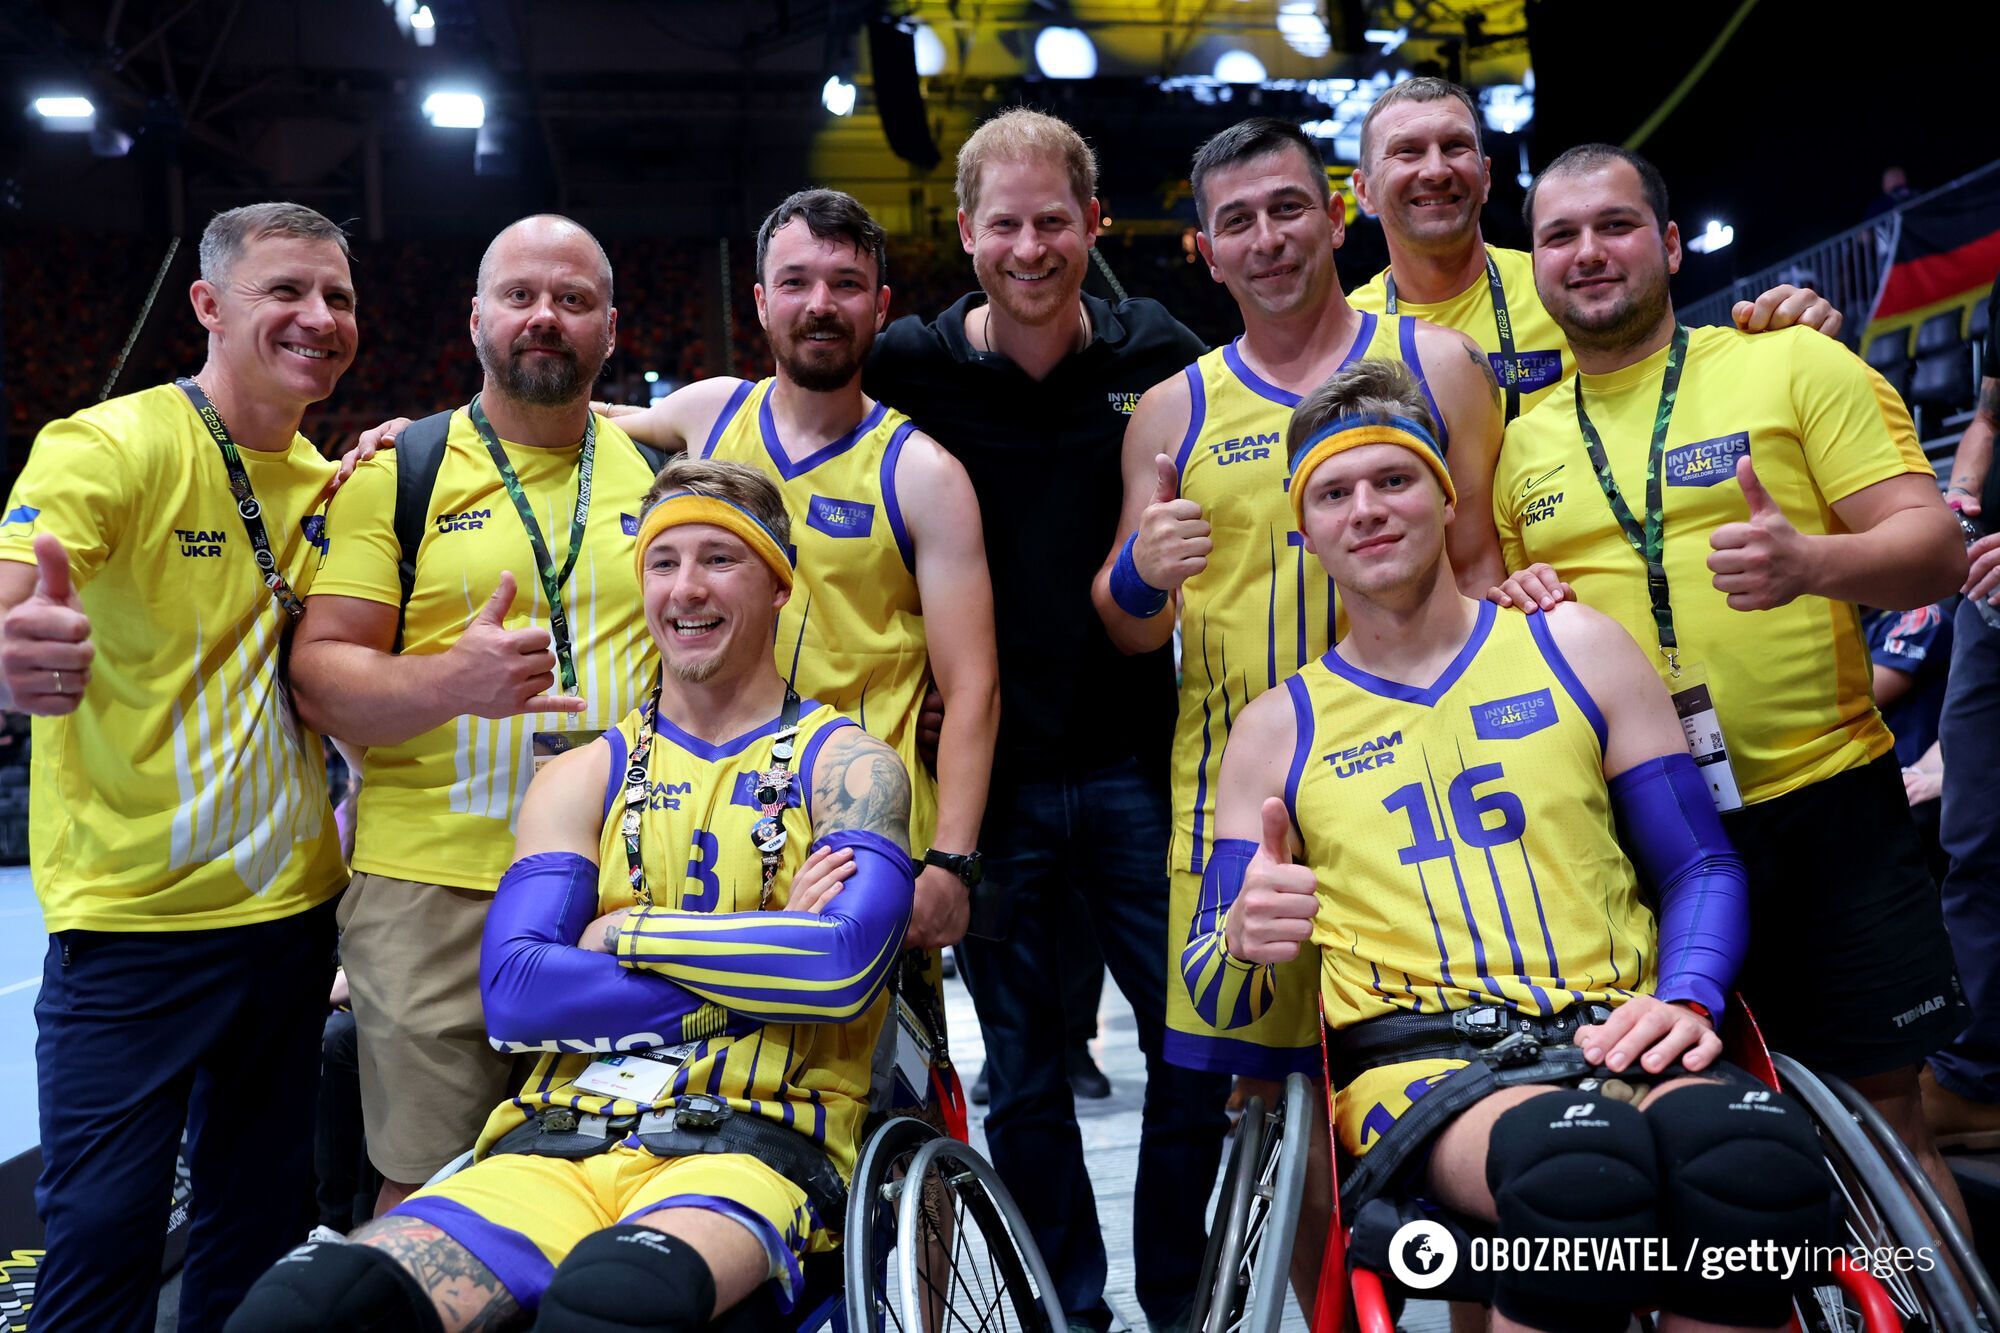 Prince Harry kneels beside Ukrainian warrior who lost his legs: video has moved the network